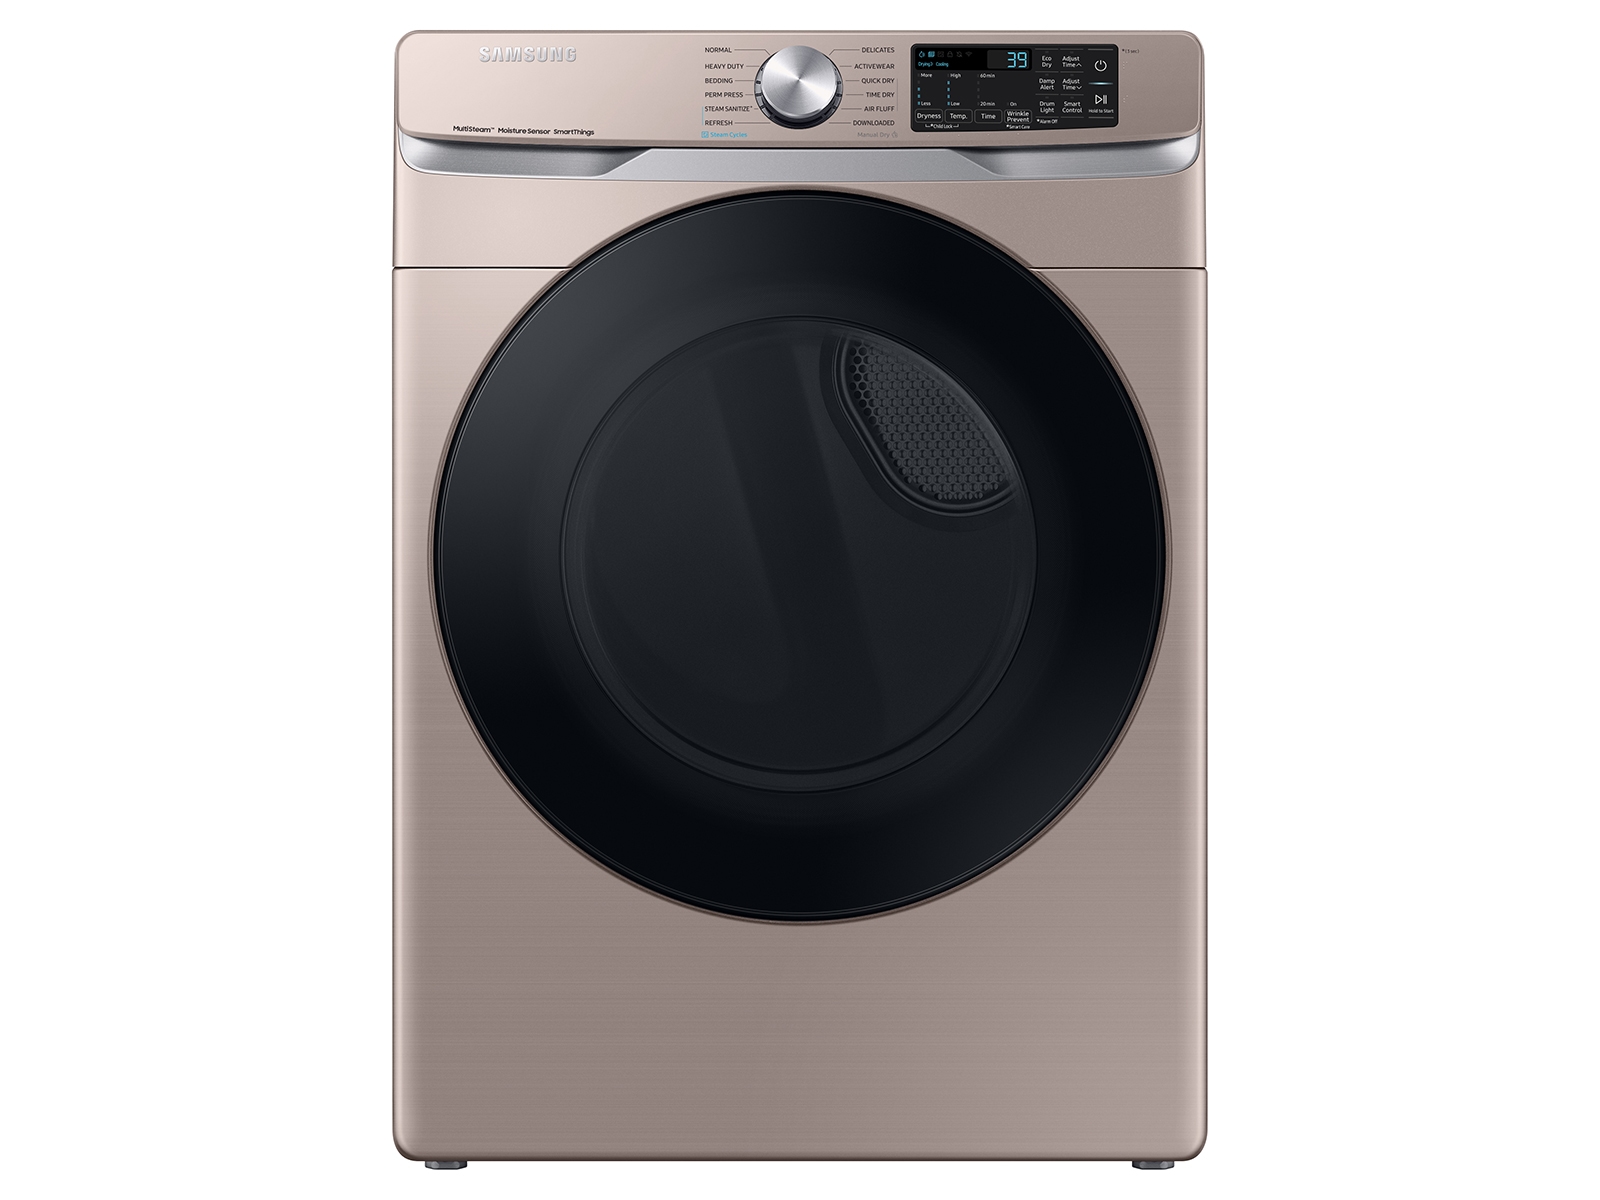 Samsung 7.5 cu. ft. Smart Gas Dryer with Steam Sanitize+ in Champagne(DVG45B6300C/A3)